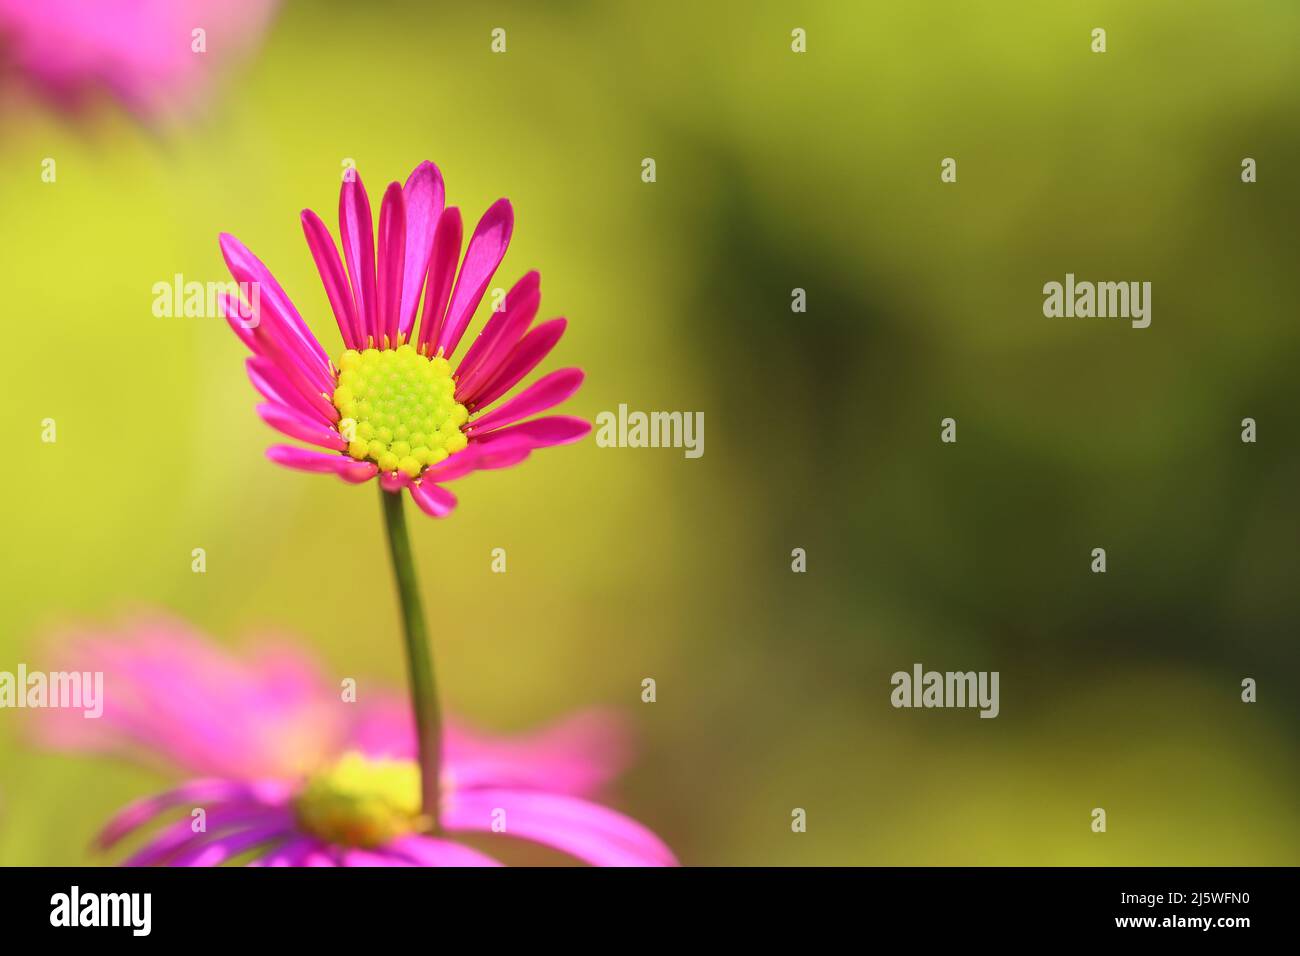 close-up of a small delicate pink brachyscome flower against a green blurred background, copy space Stock Photo